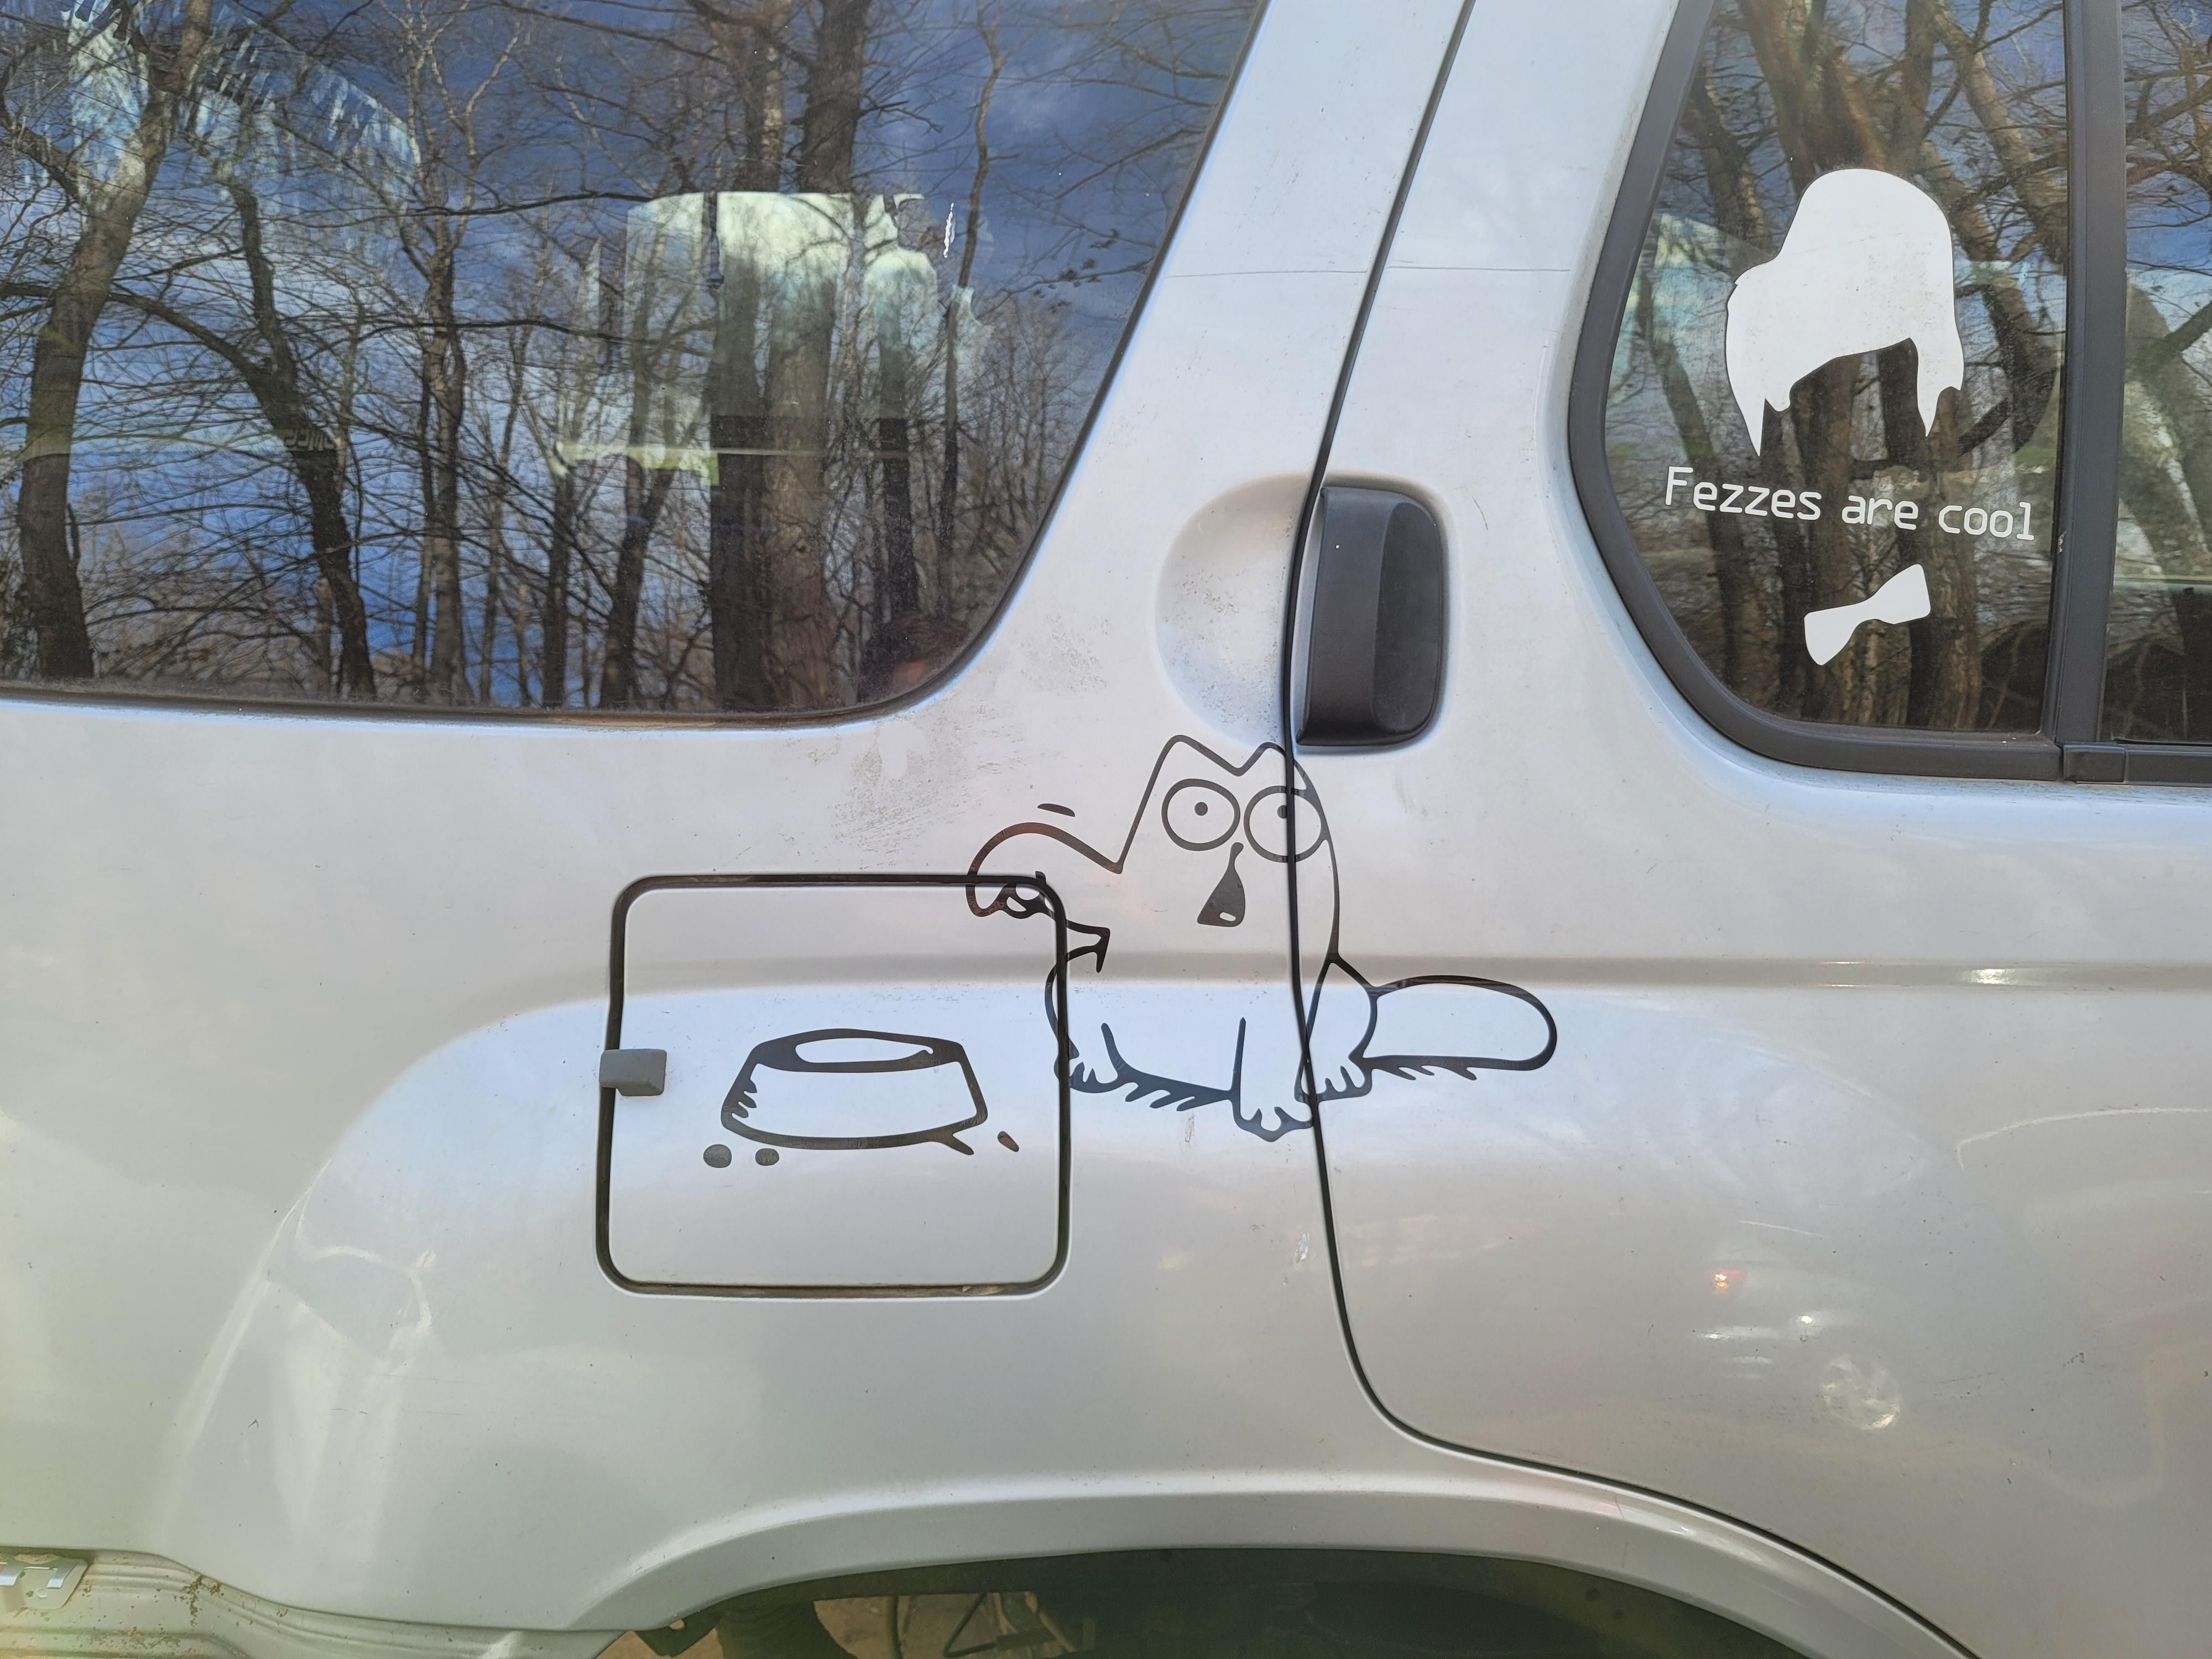 Nice addition to my gas guzzler! Art by Simon Tofield, vinyl decal made by Lifestyle Offroad